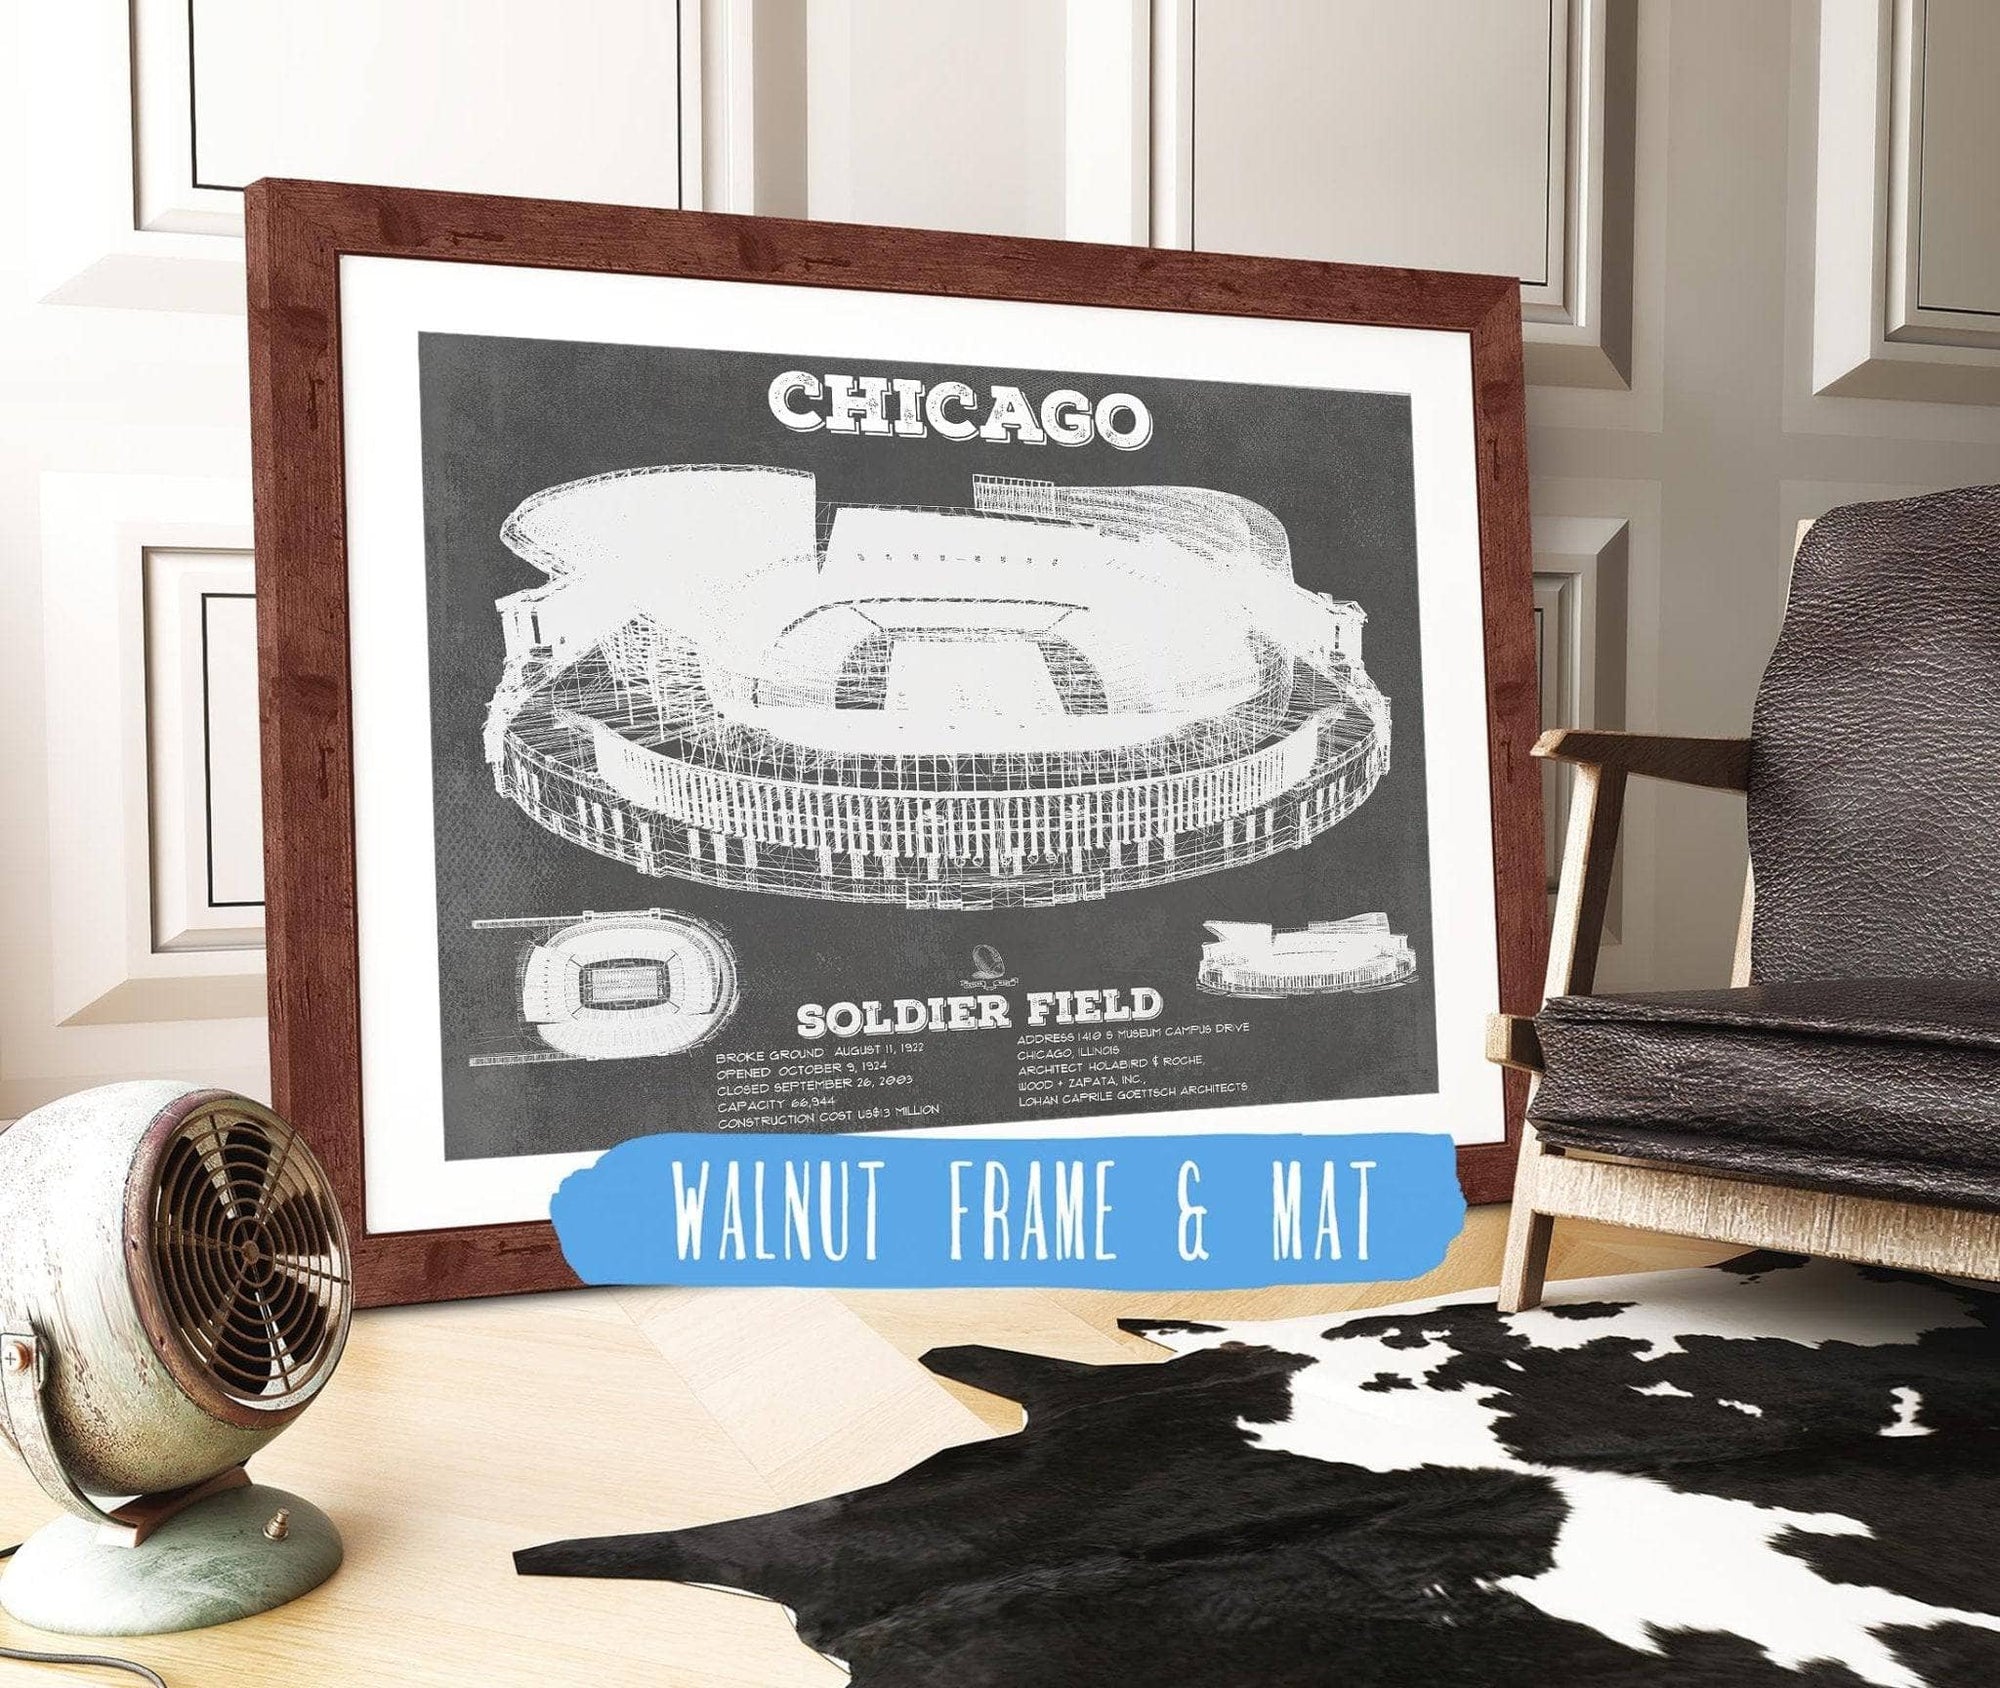 Cutler West Pro Football Collection 14" x 11" / Walnut Frame & Mat Chicago Bears Stadium Seating Chart - Soldier Field - Vintage Football Print 635629280_28876